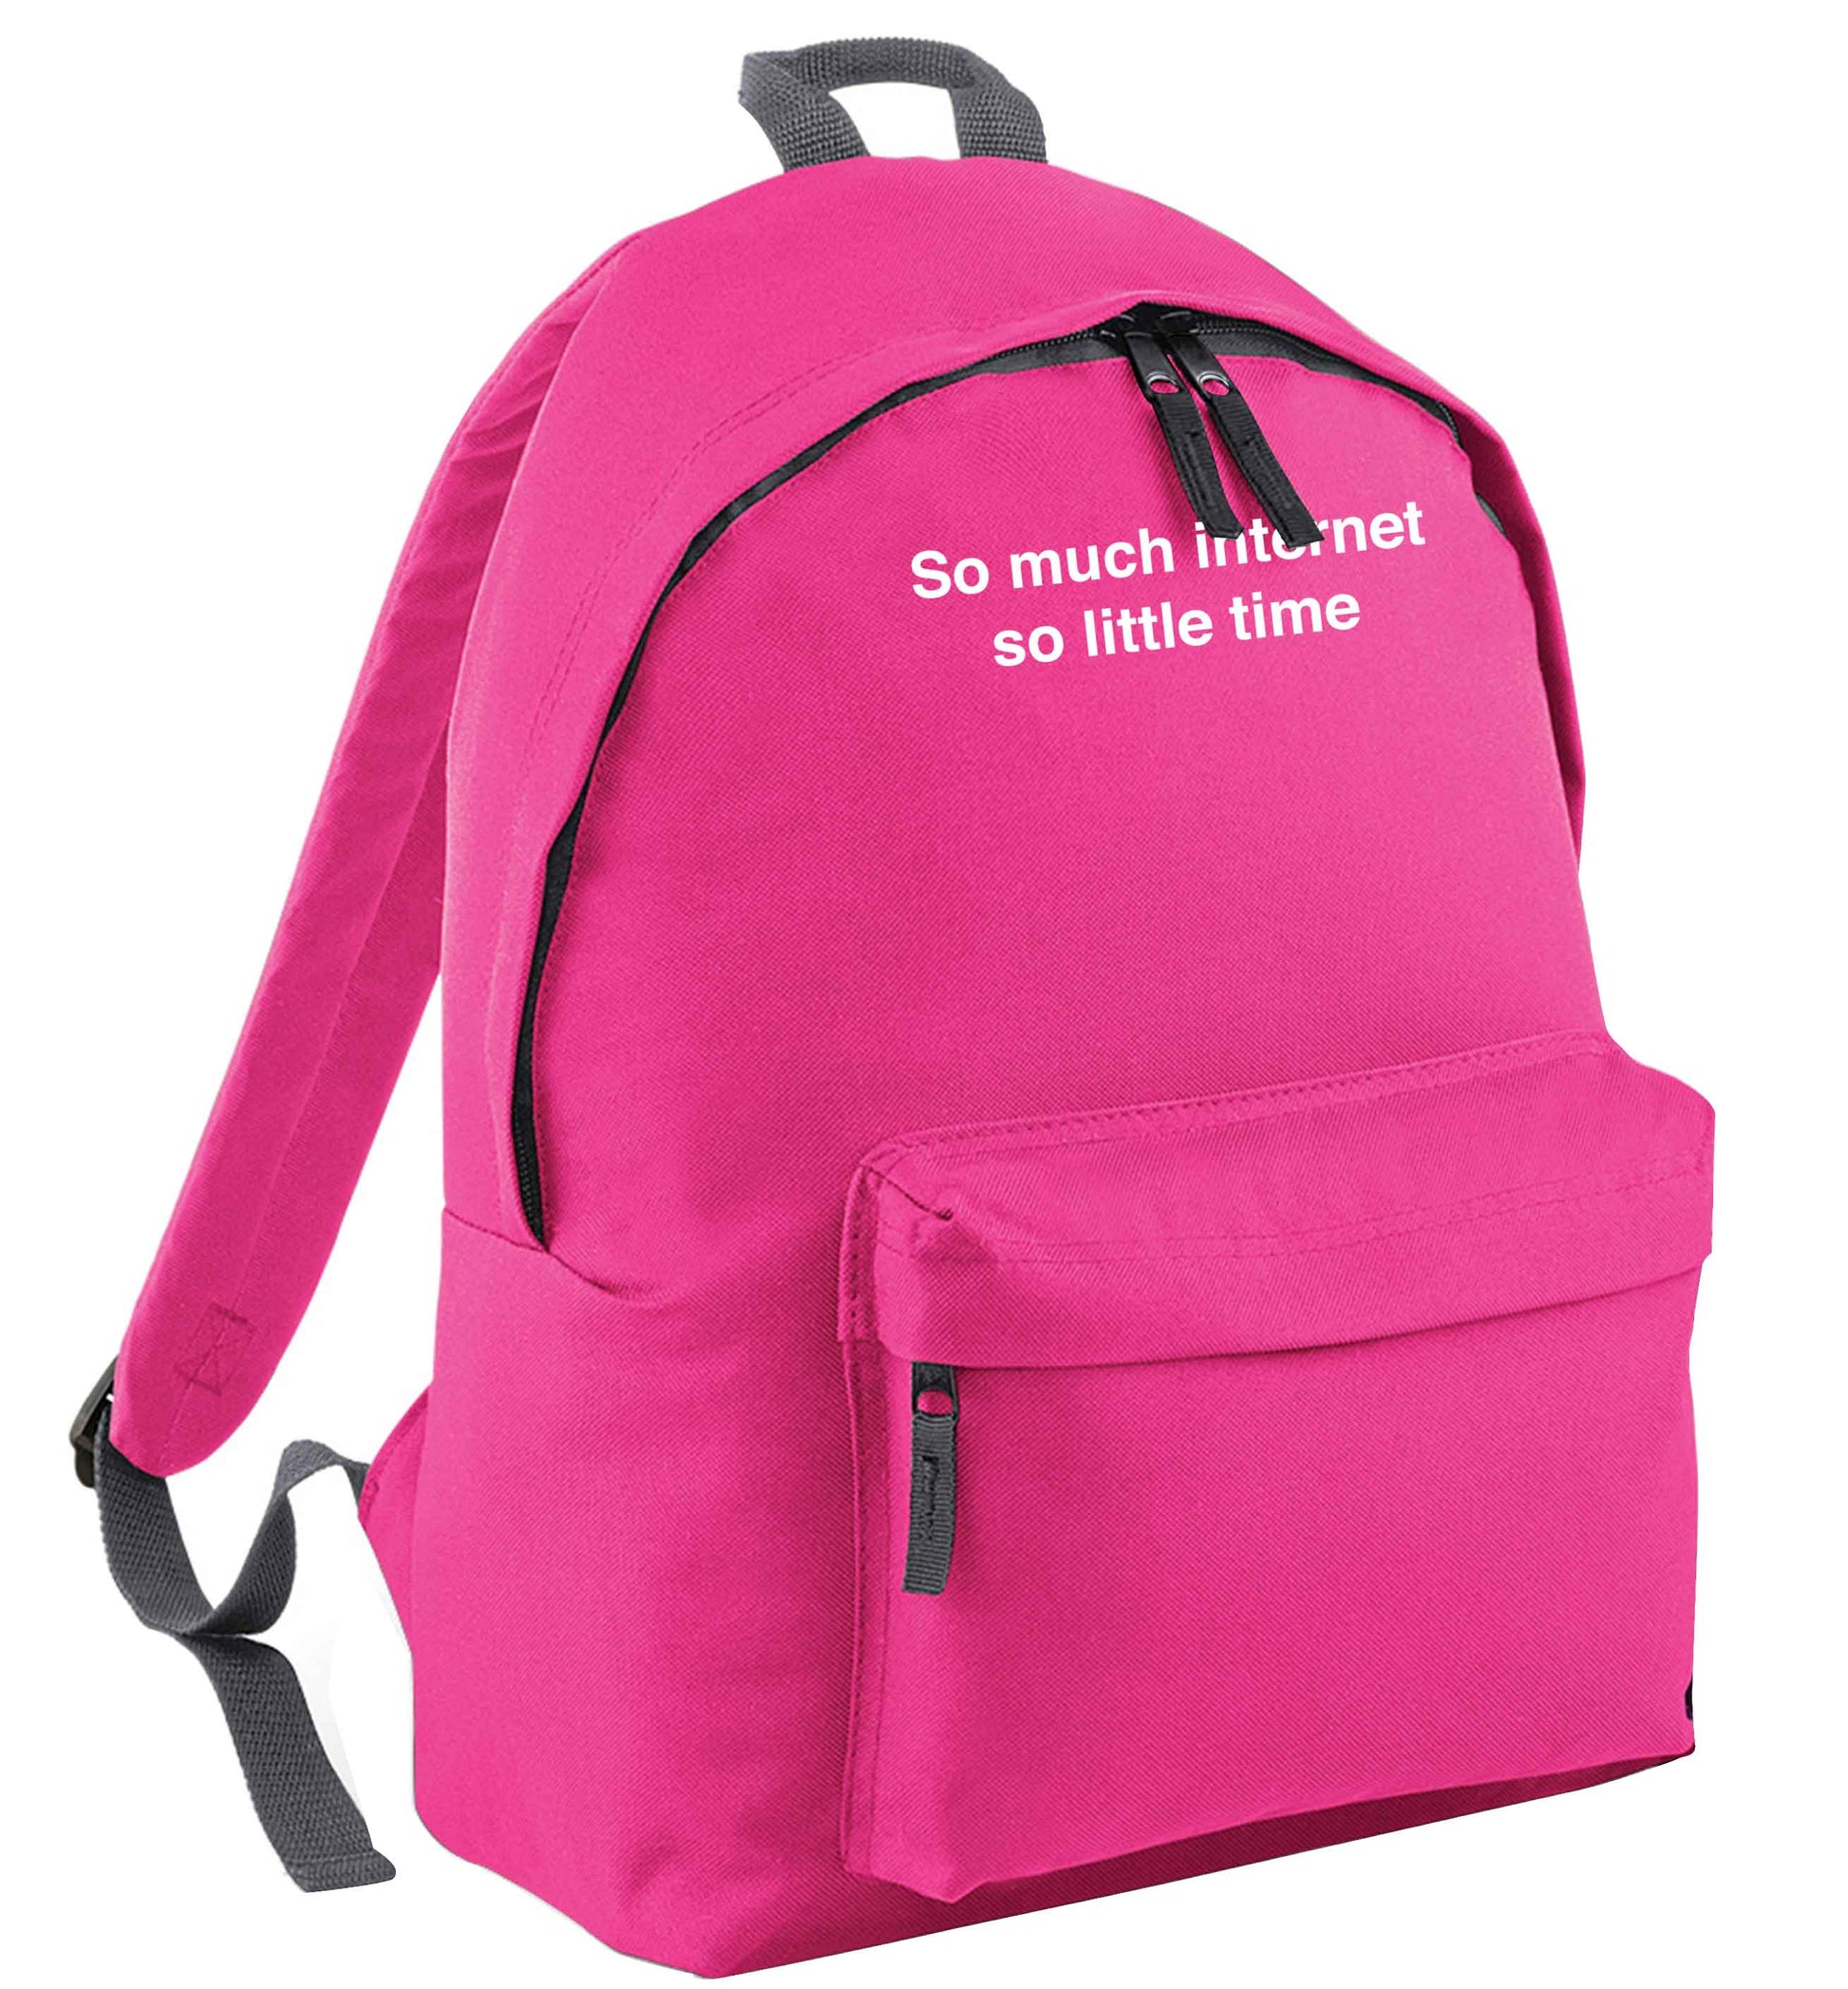 So much internet so little time pink adults backpack